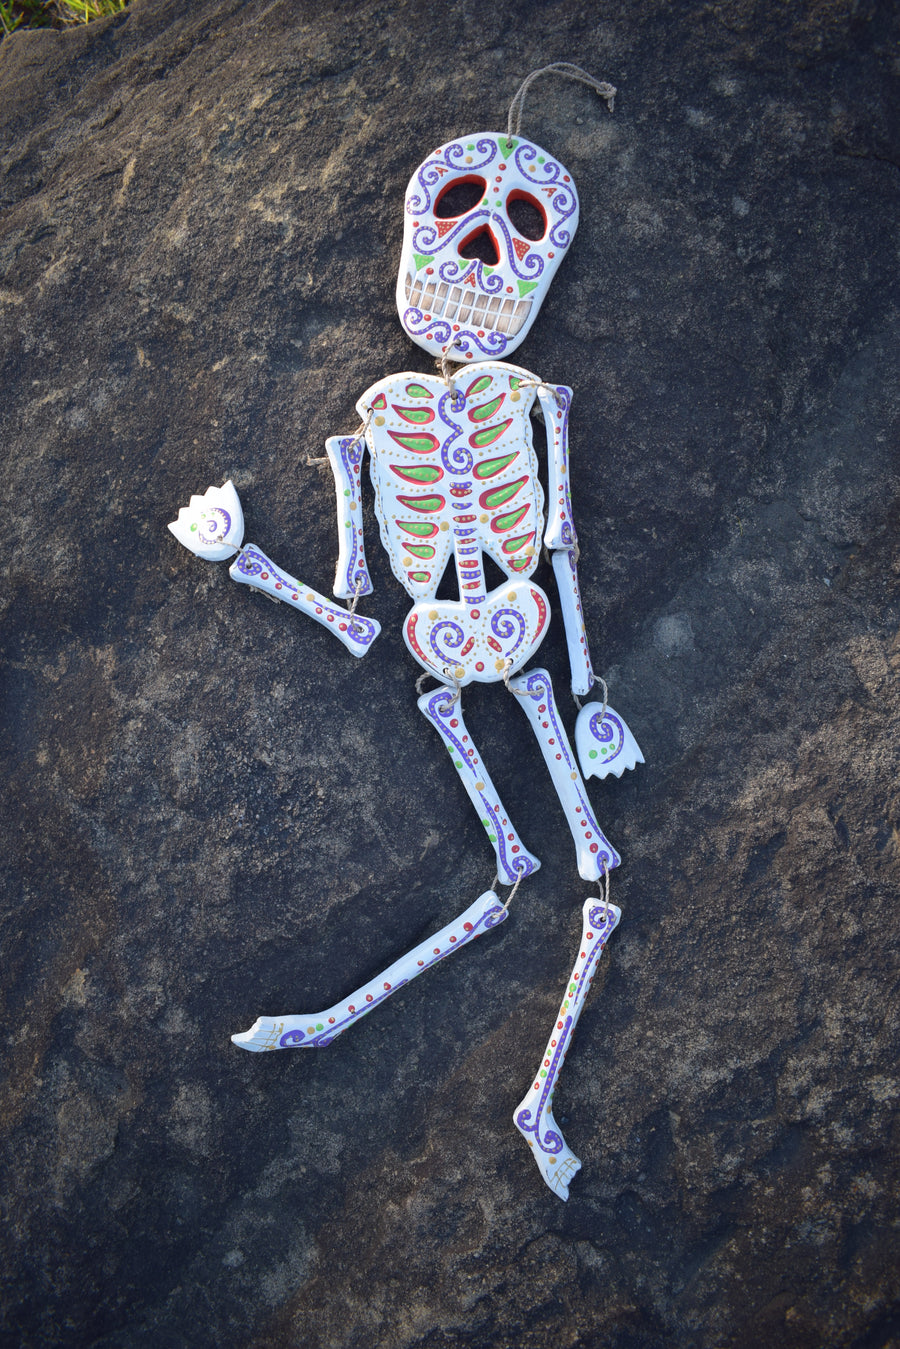 A colourful calaca Day of the Dead spirit medicine rattle resting on a rock